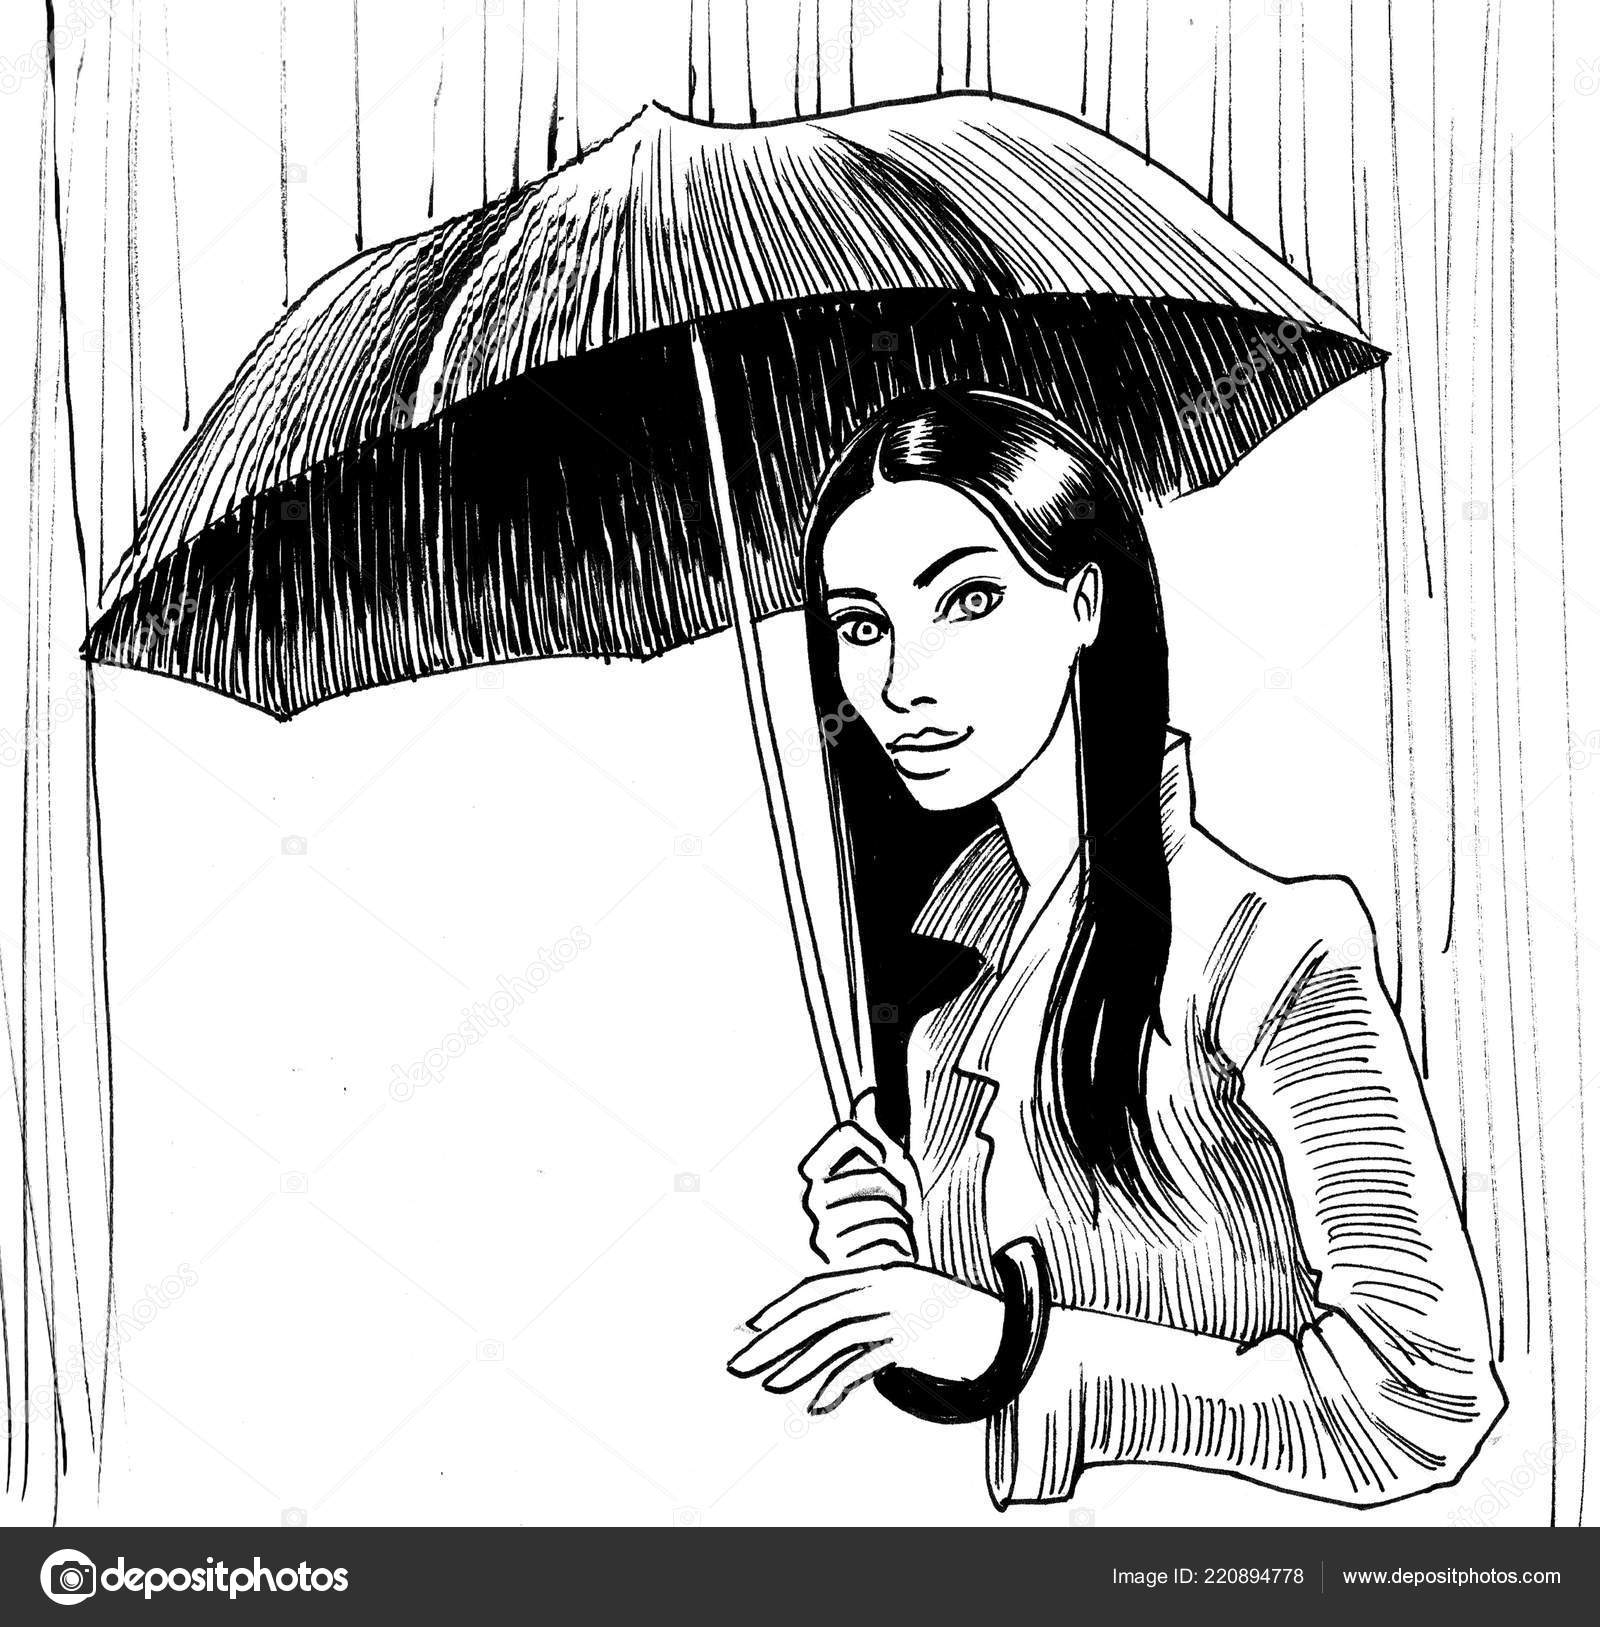 Draw a girl with umbrella || Rainy day pencil sketch : r/drawing